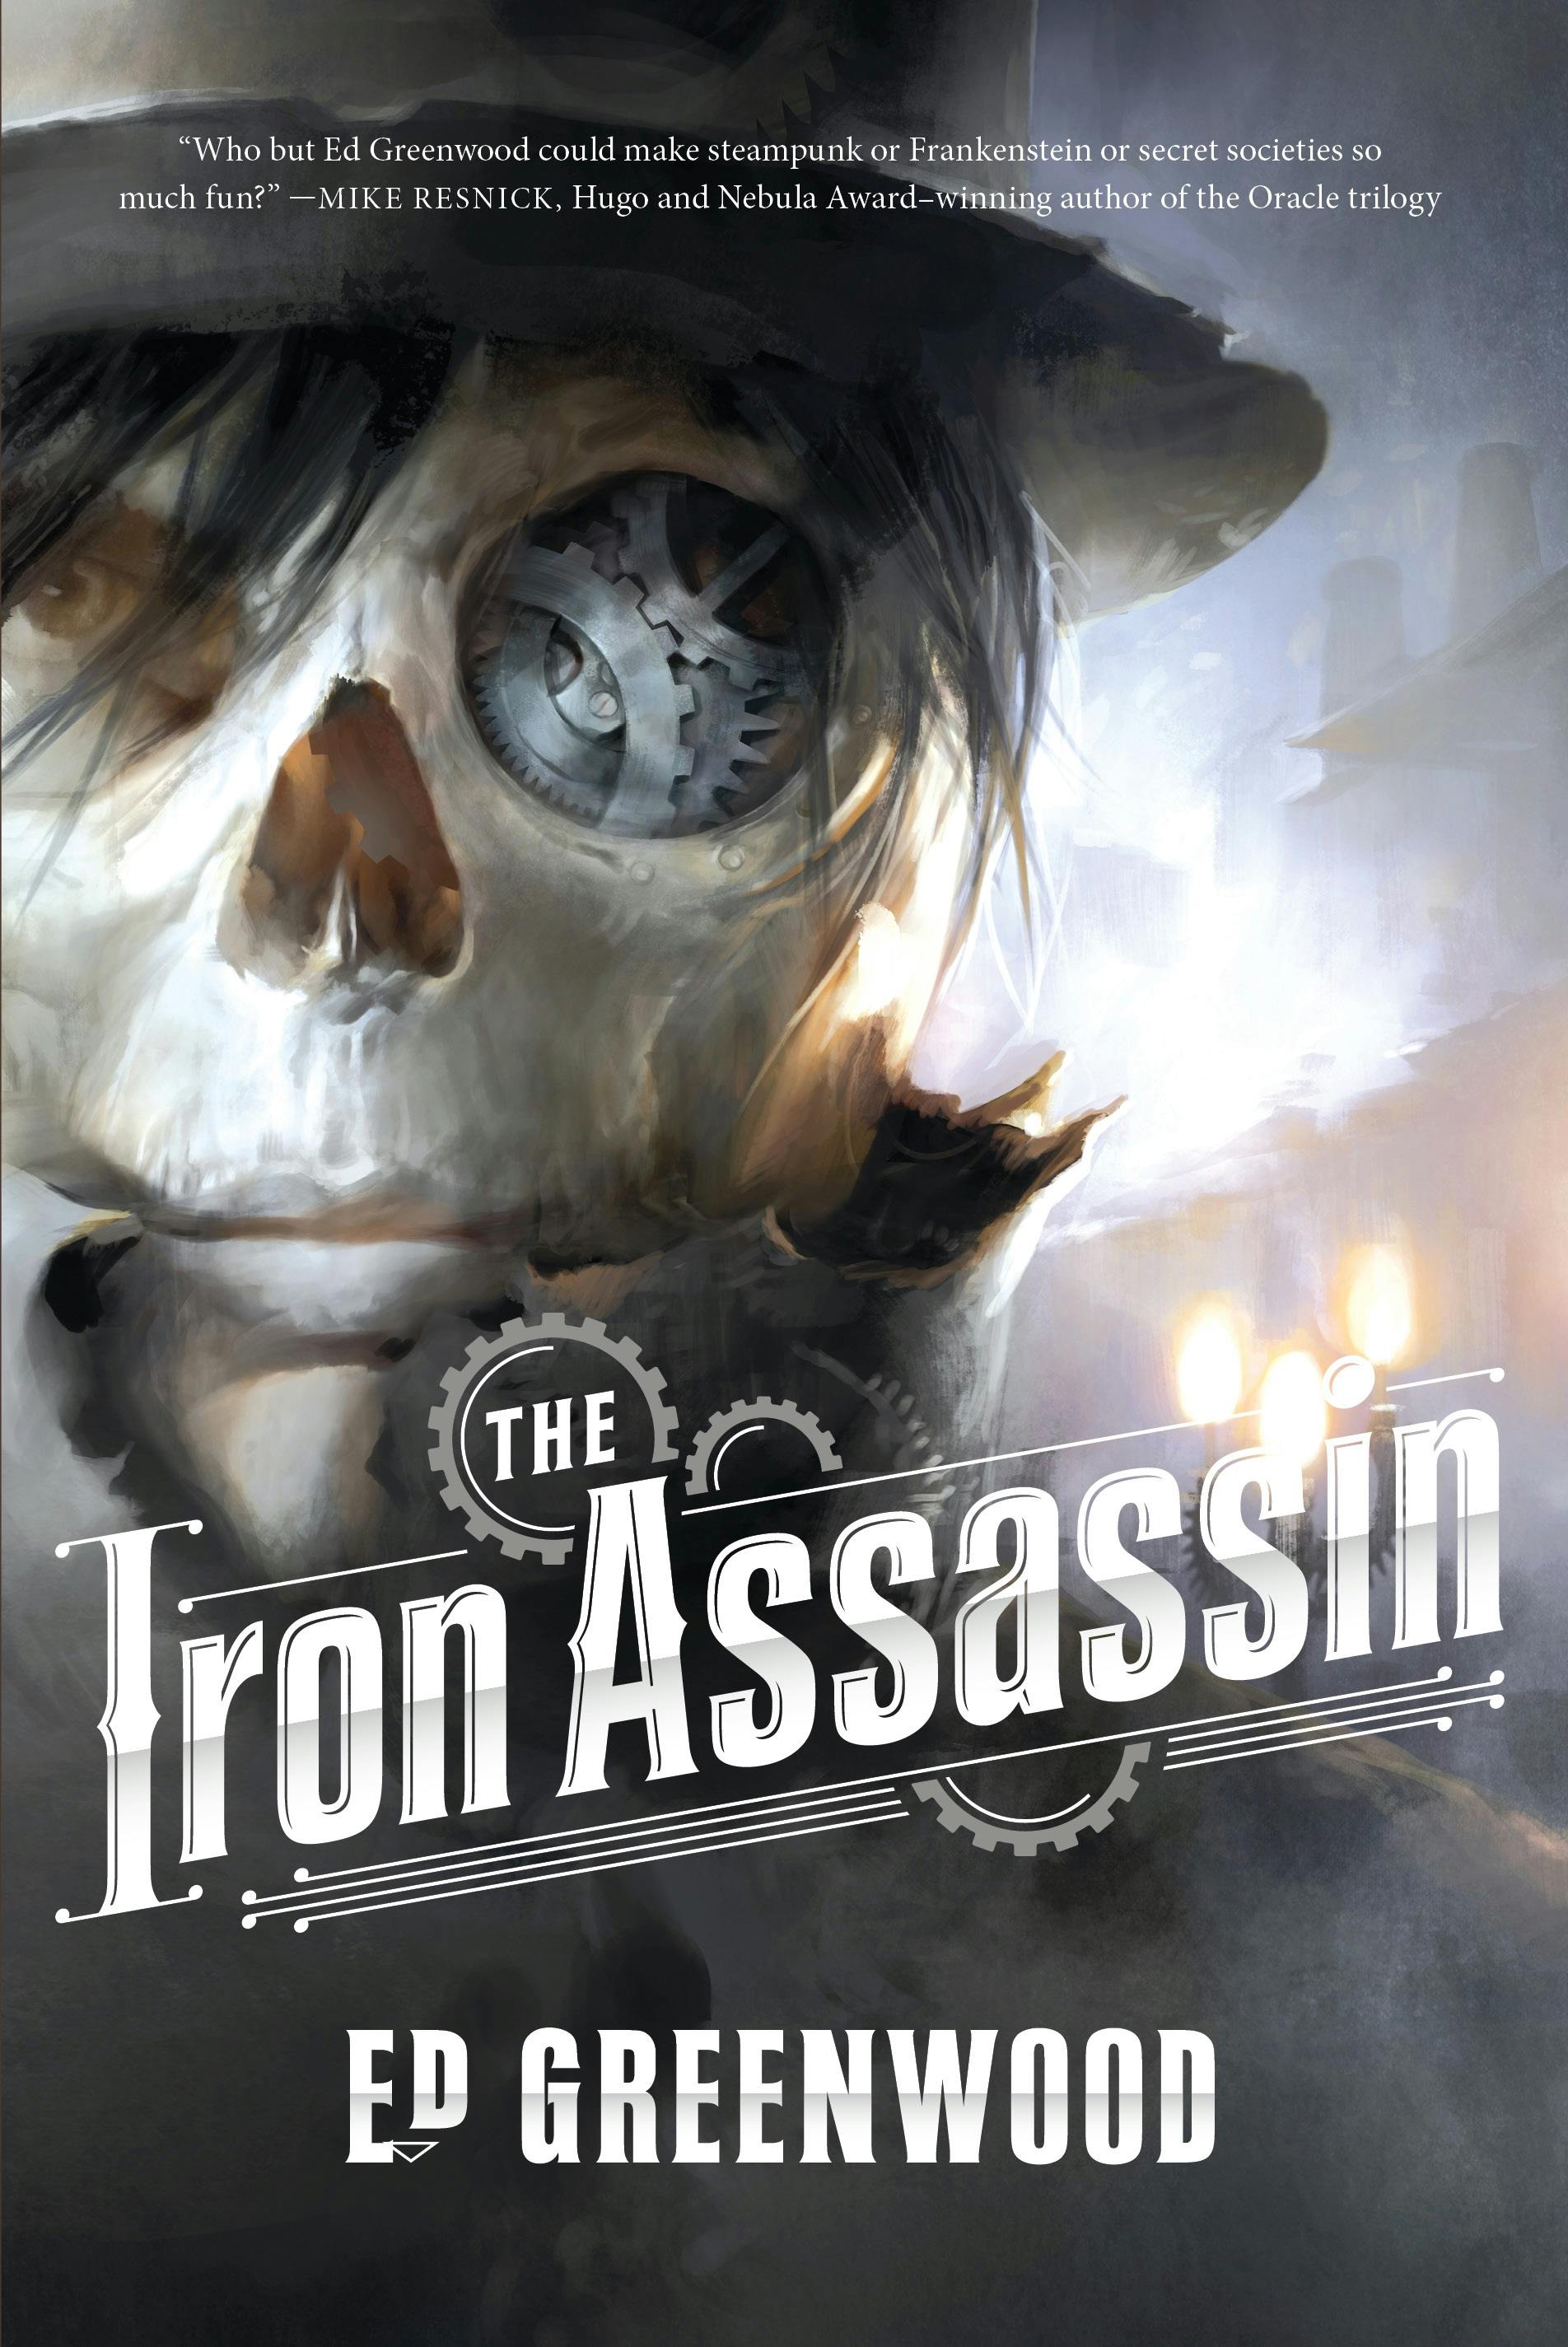 Cover for the book titled as: The Iron Assassin